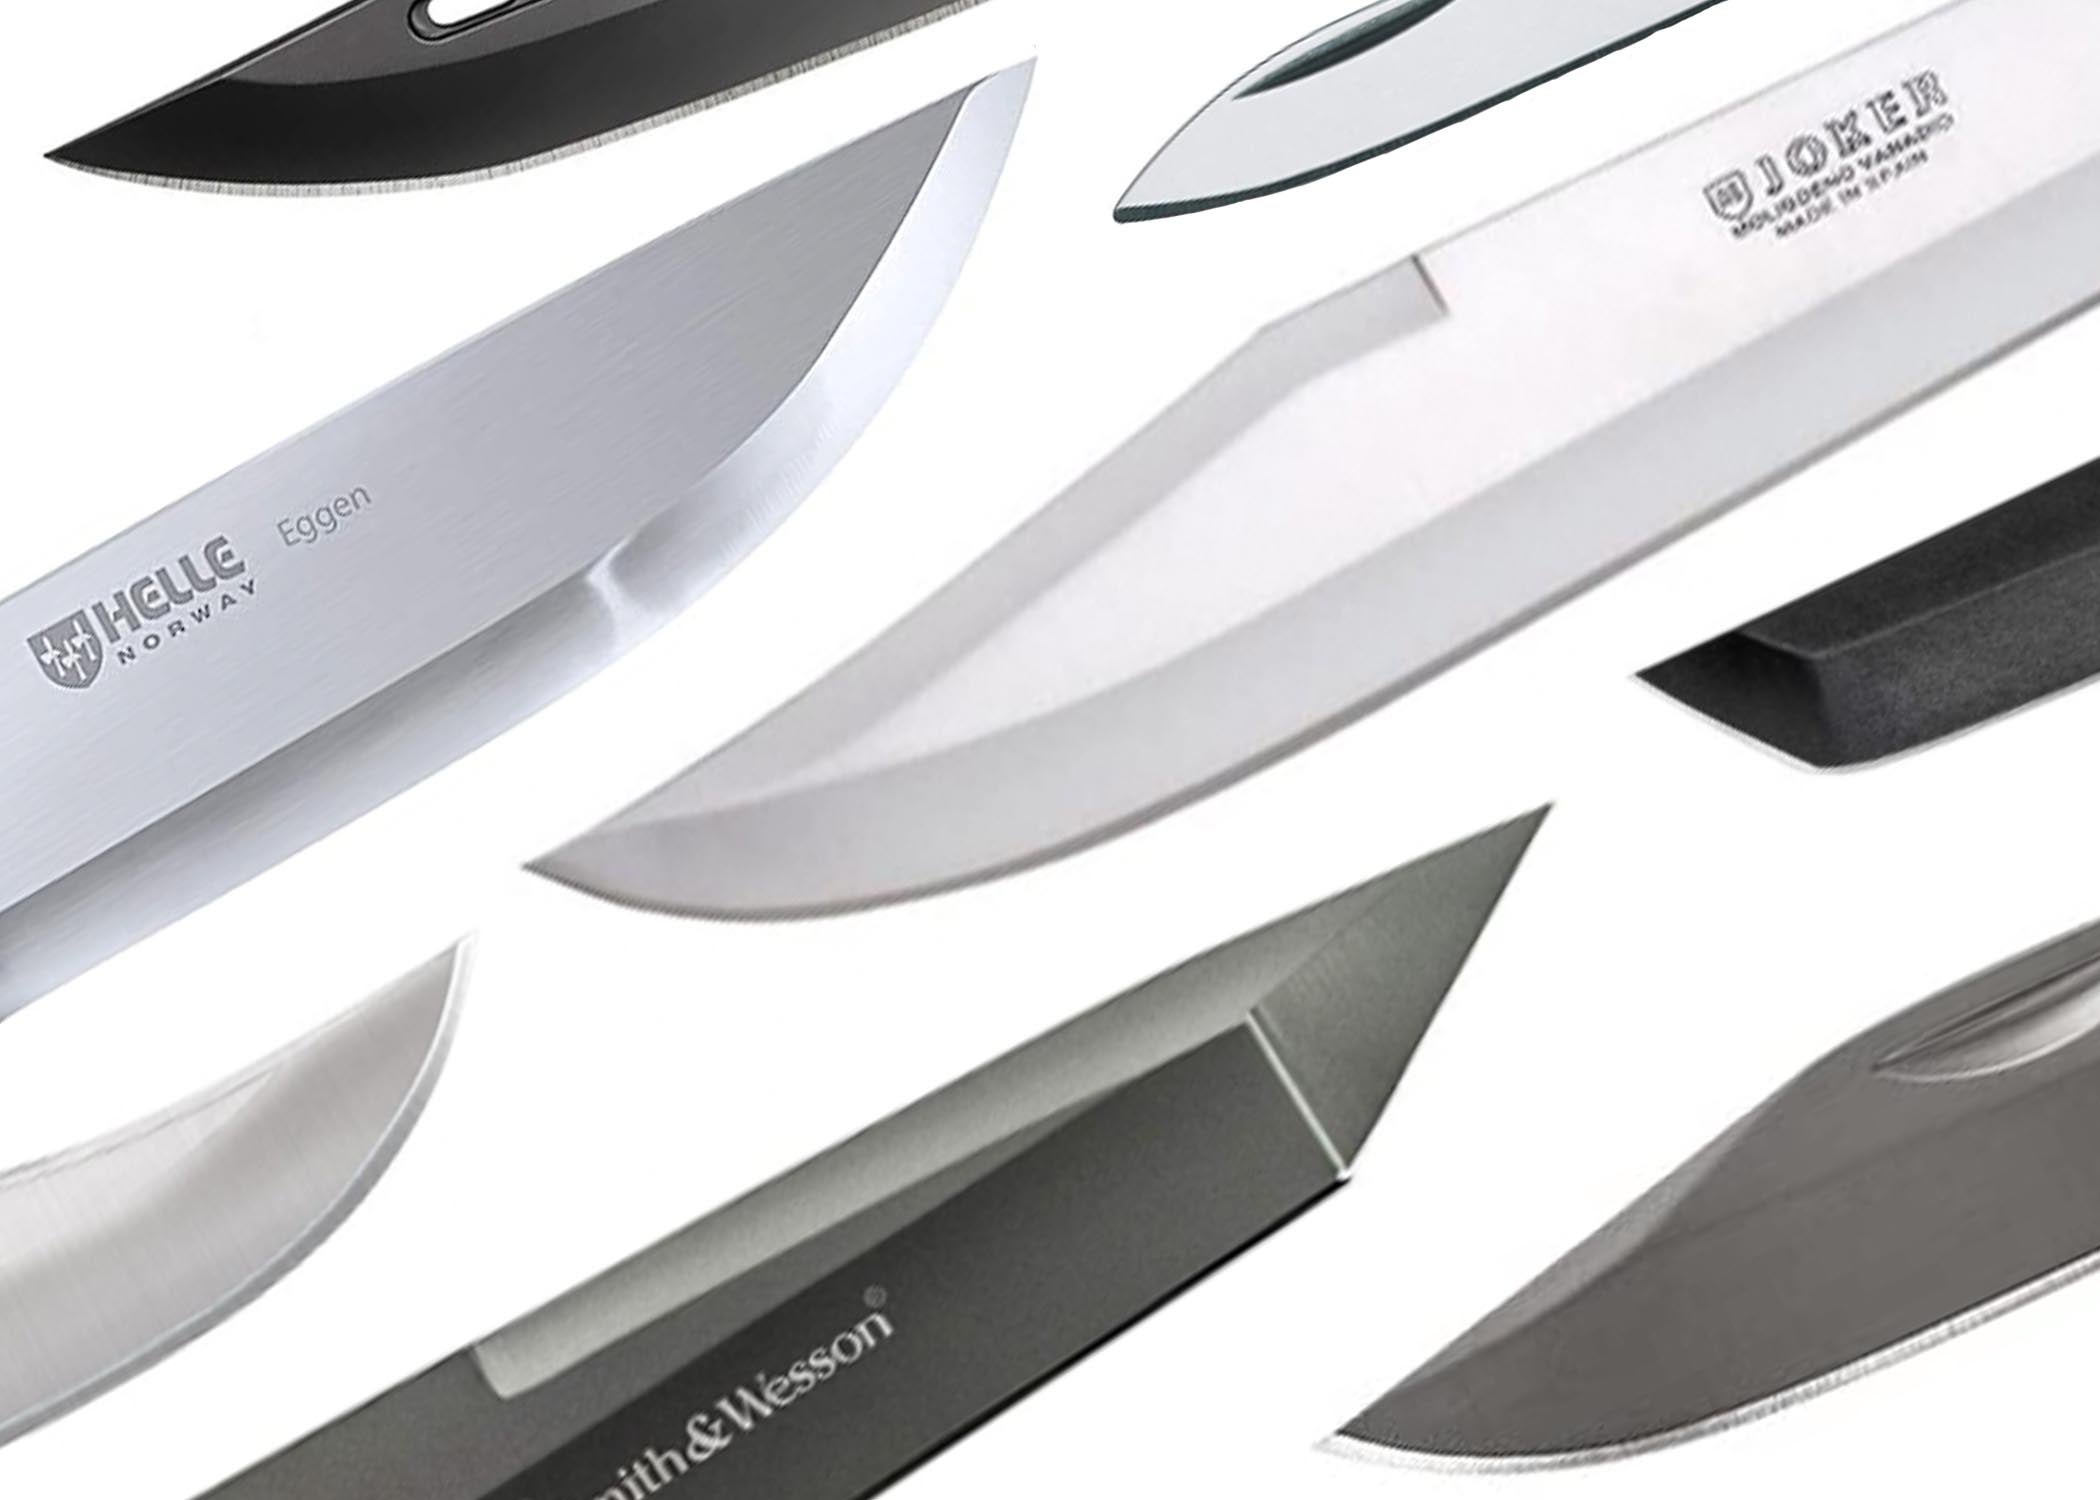 Pick your knife from Zumrafood's selection of the sharpest knives